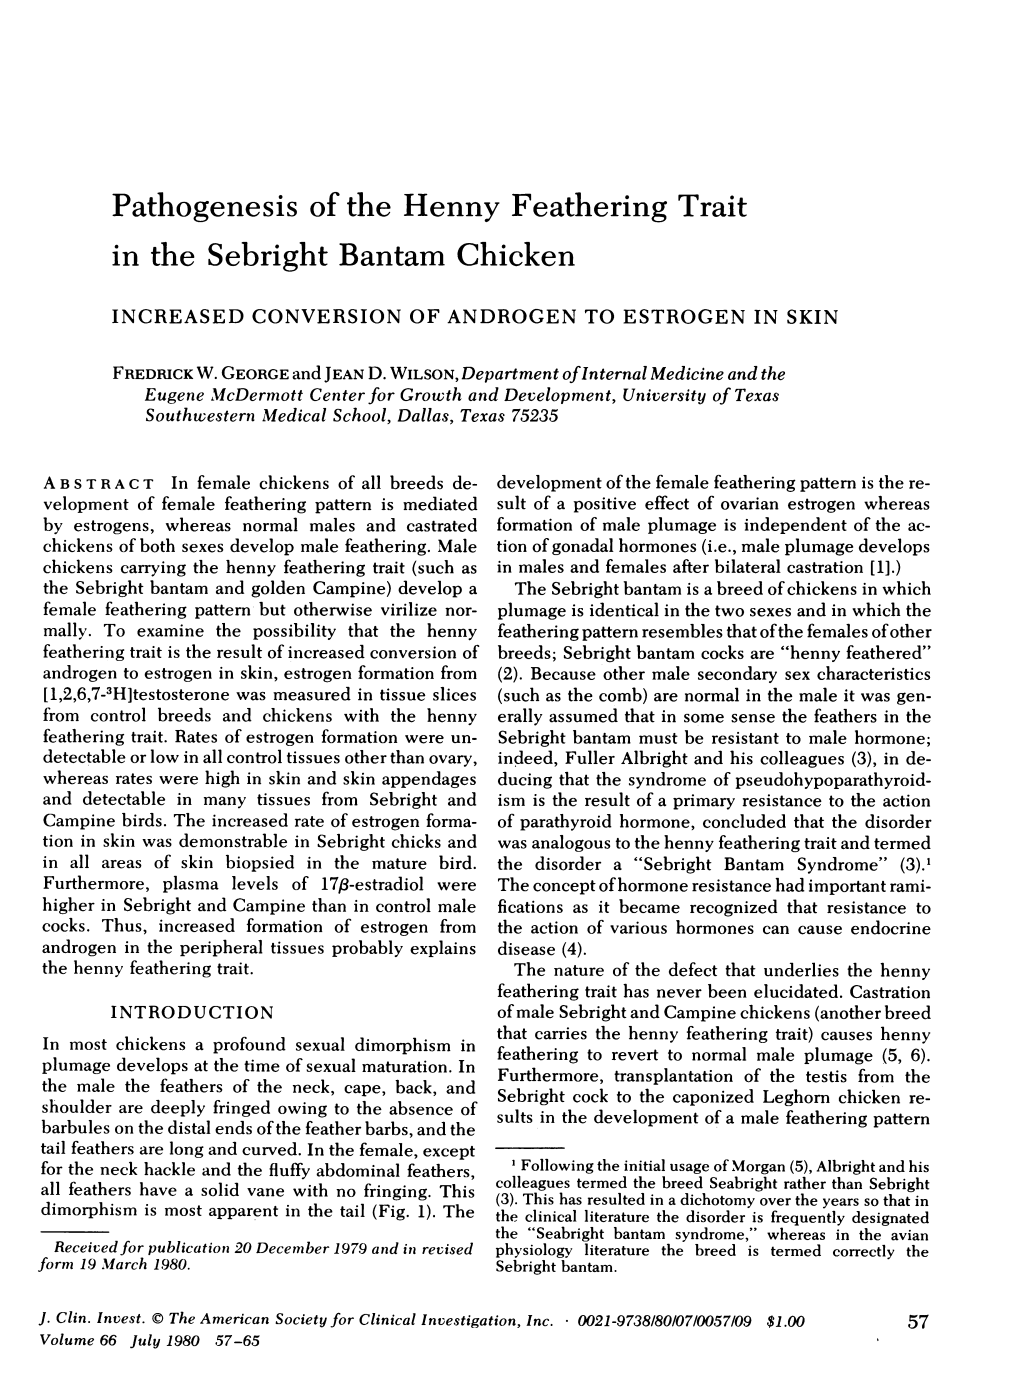 Pathogenesis of the Henny Feathering Trait in the Sebright Bantam Chicken